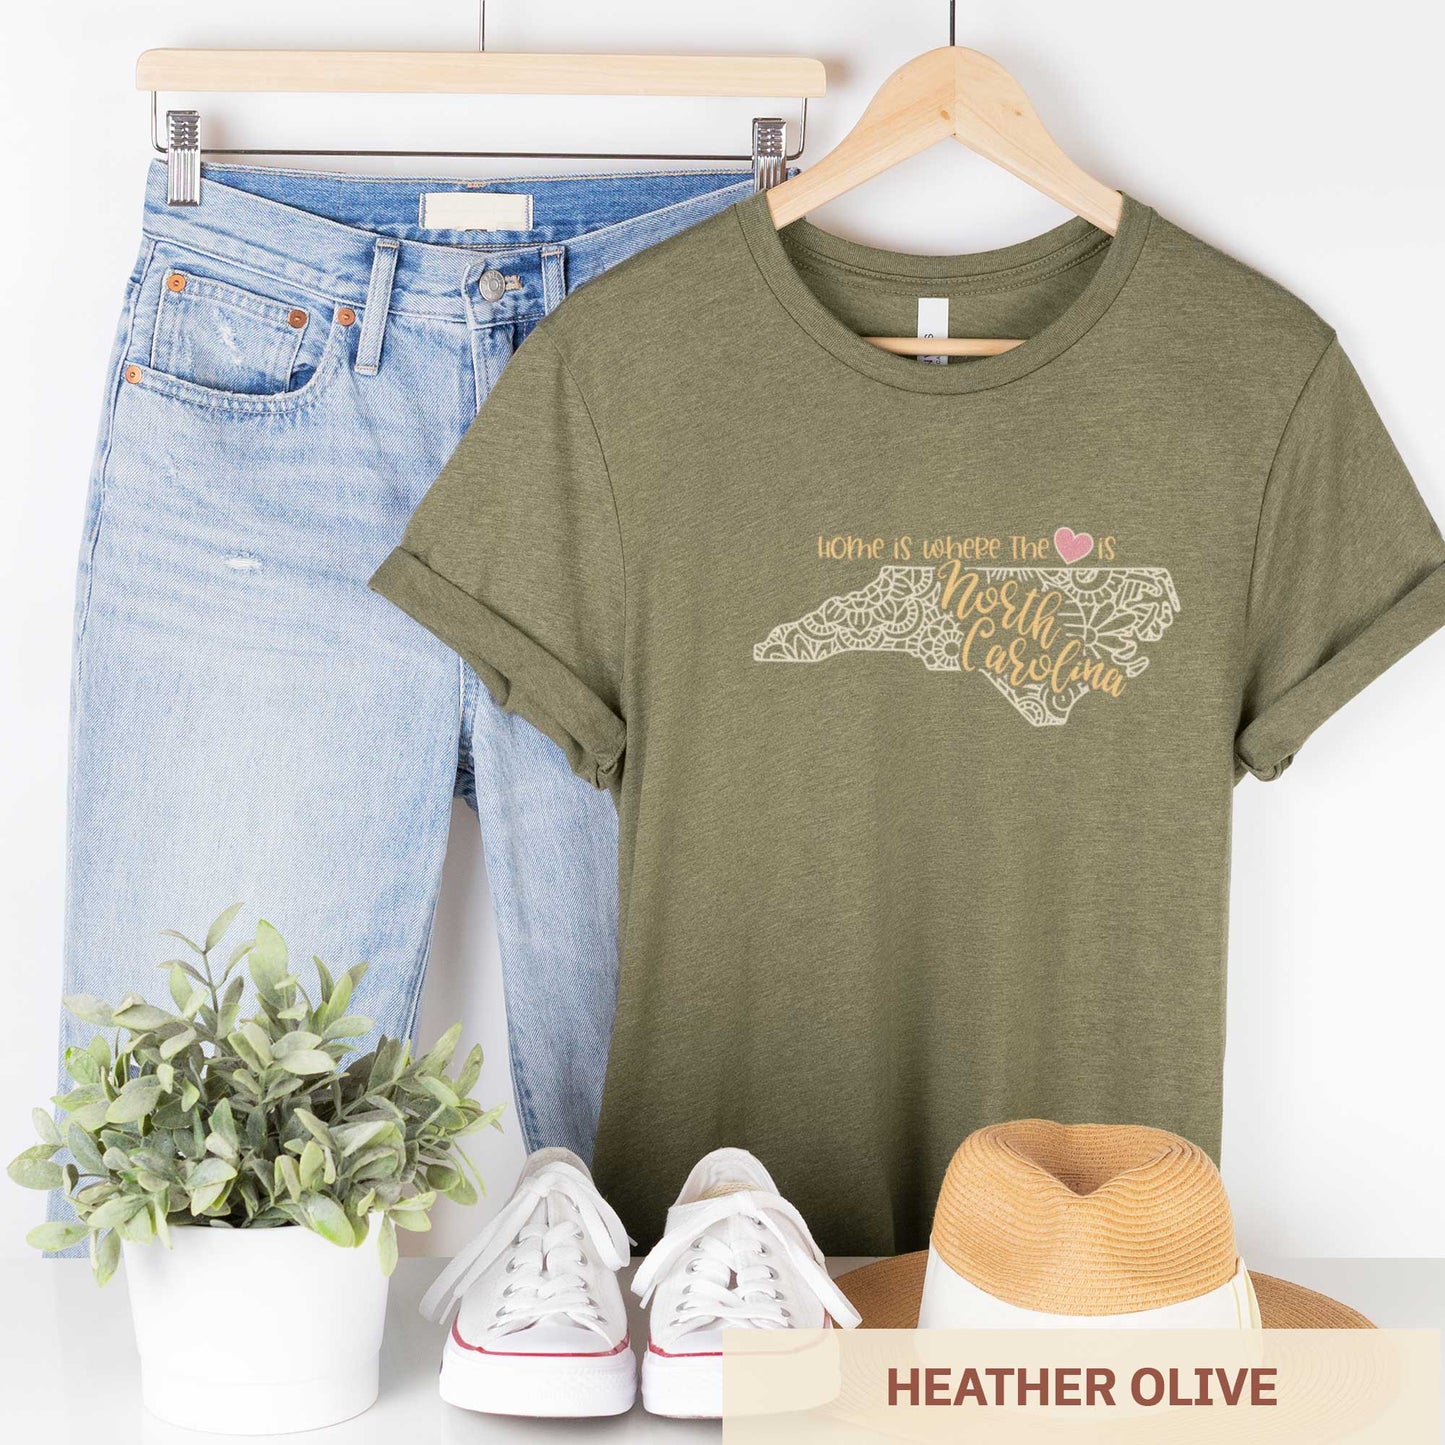 A hanging heather olive Bella Canvas t-shirt featuring a mandala in the shape of North Carolina with the words home is where the heart is.